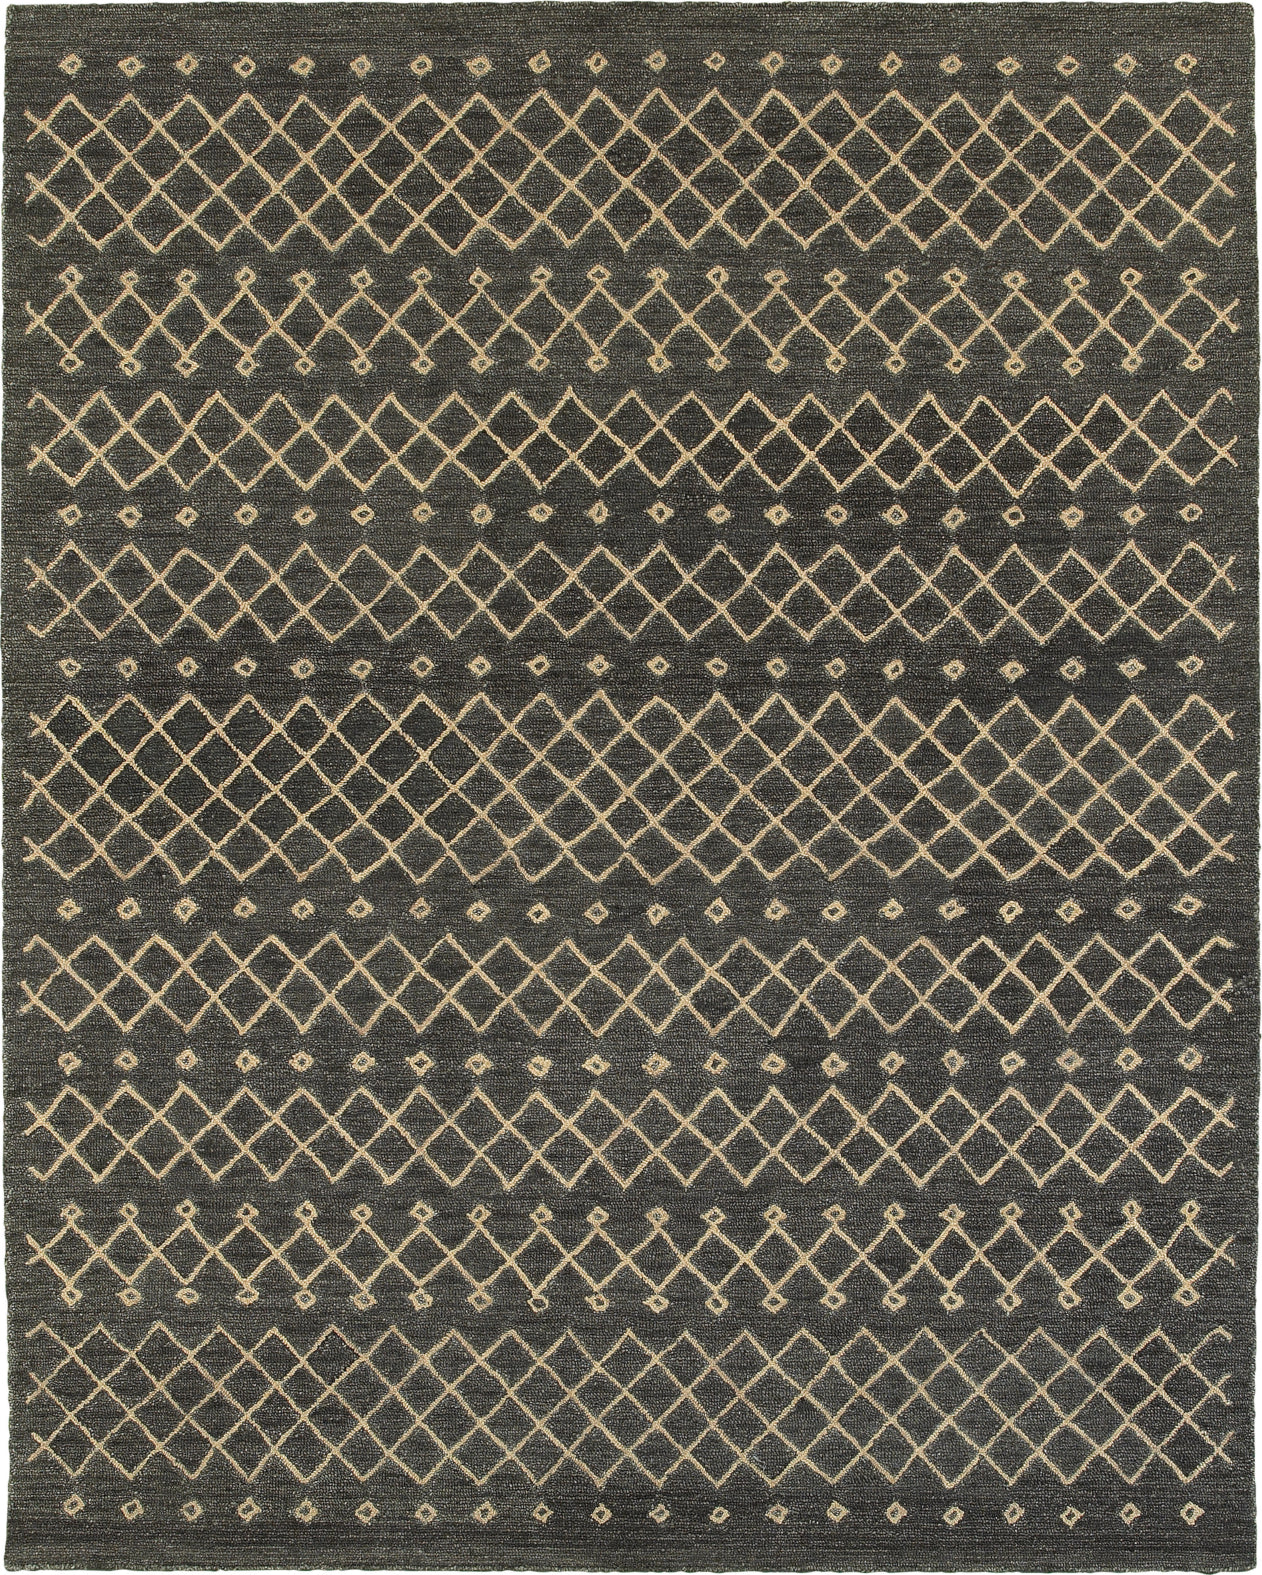 LR Resources Integrity 12013 Charcoal Area Rug main image